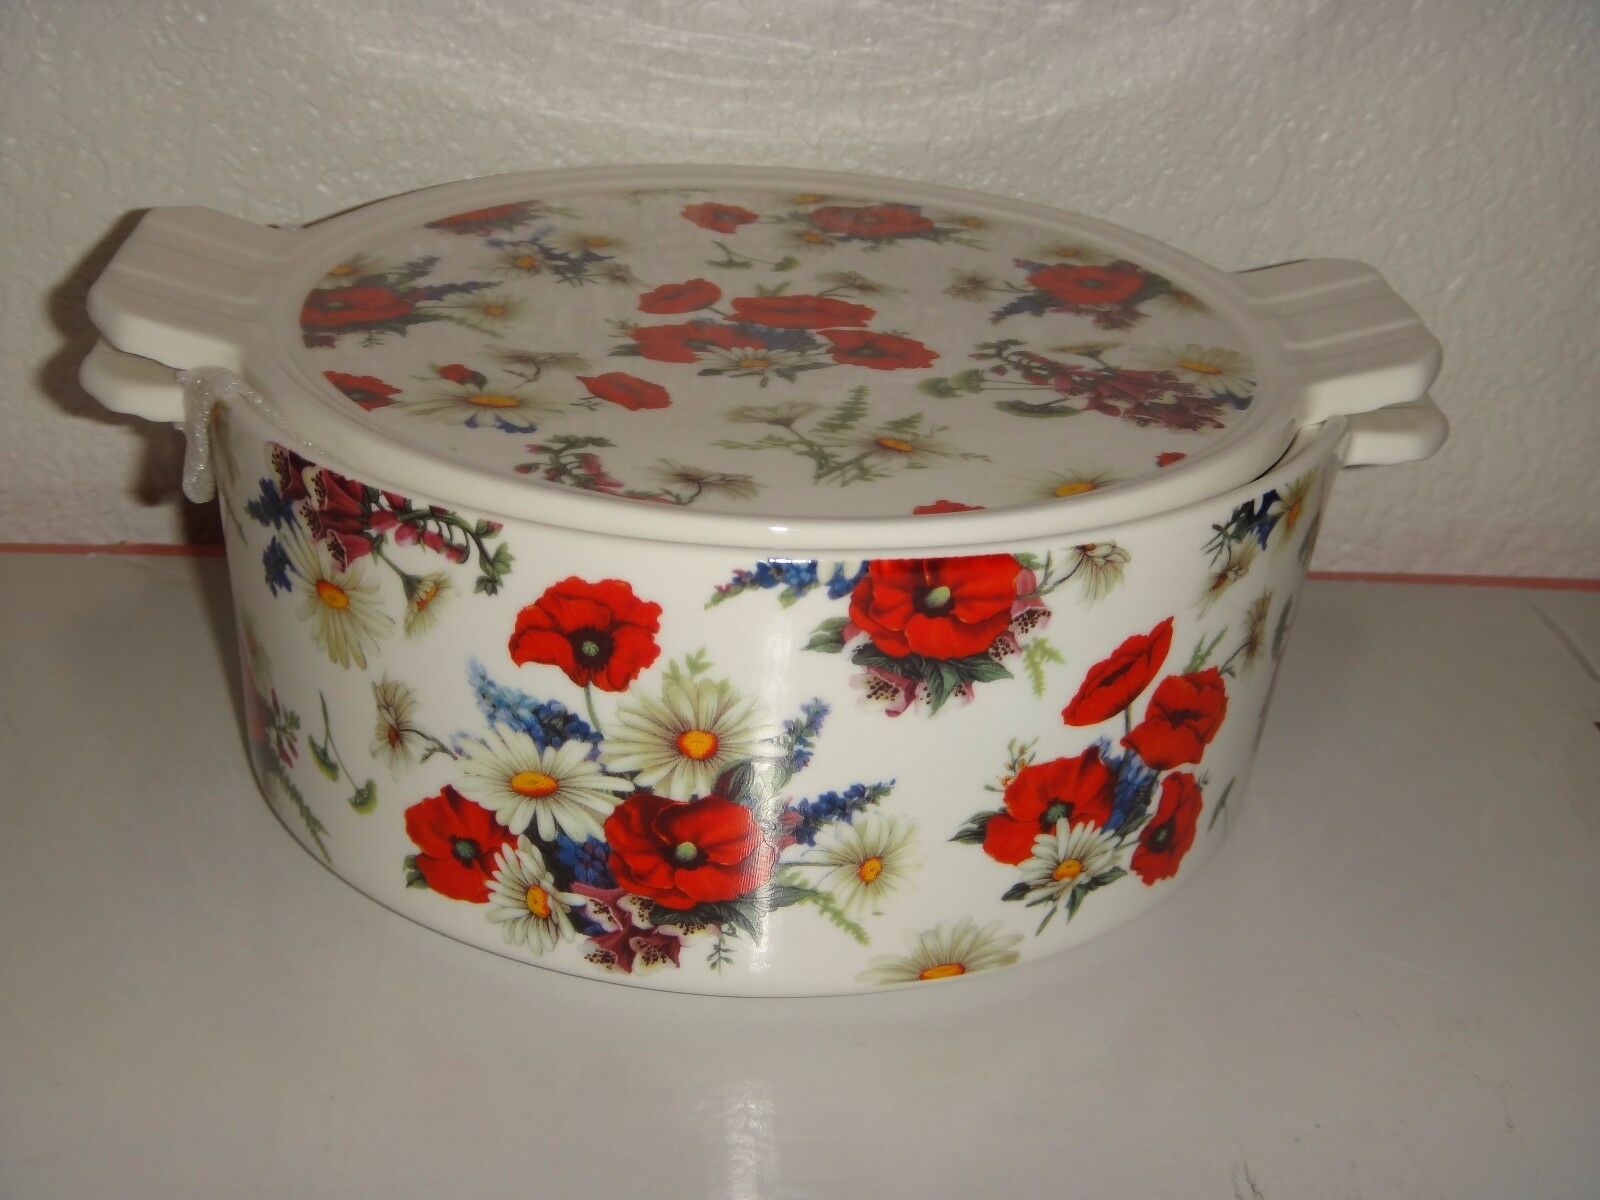 Grace's Pantry Porcelain Floral Poppies Daisies Round Backing Dish With Lid ~new